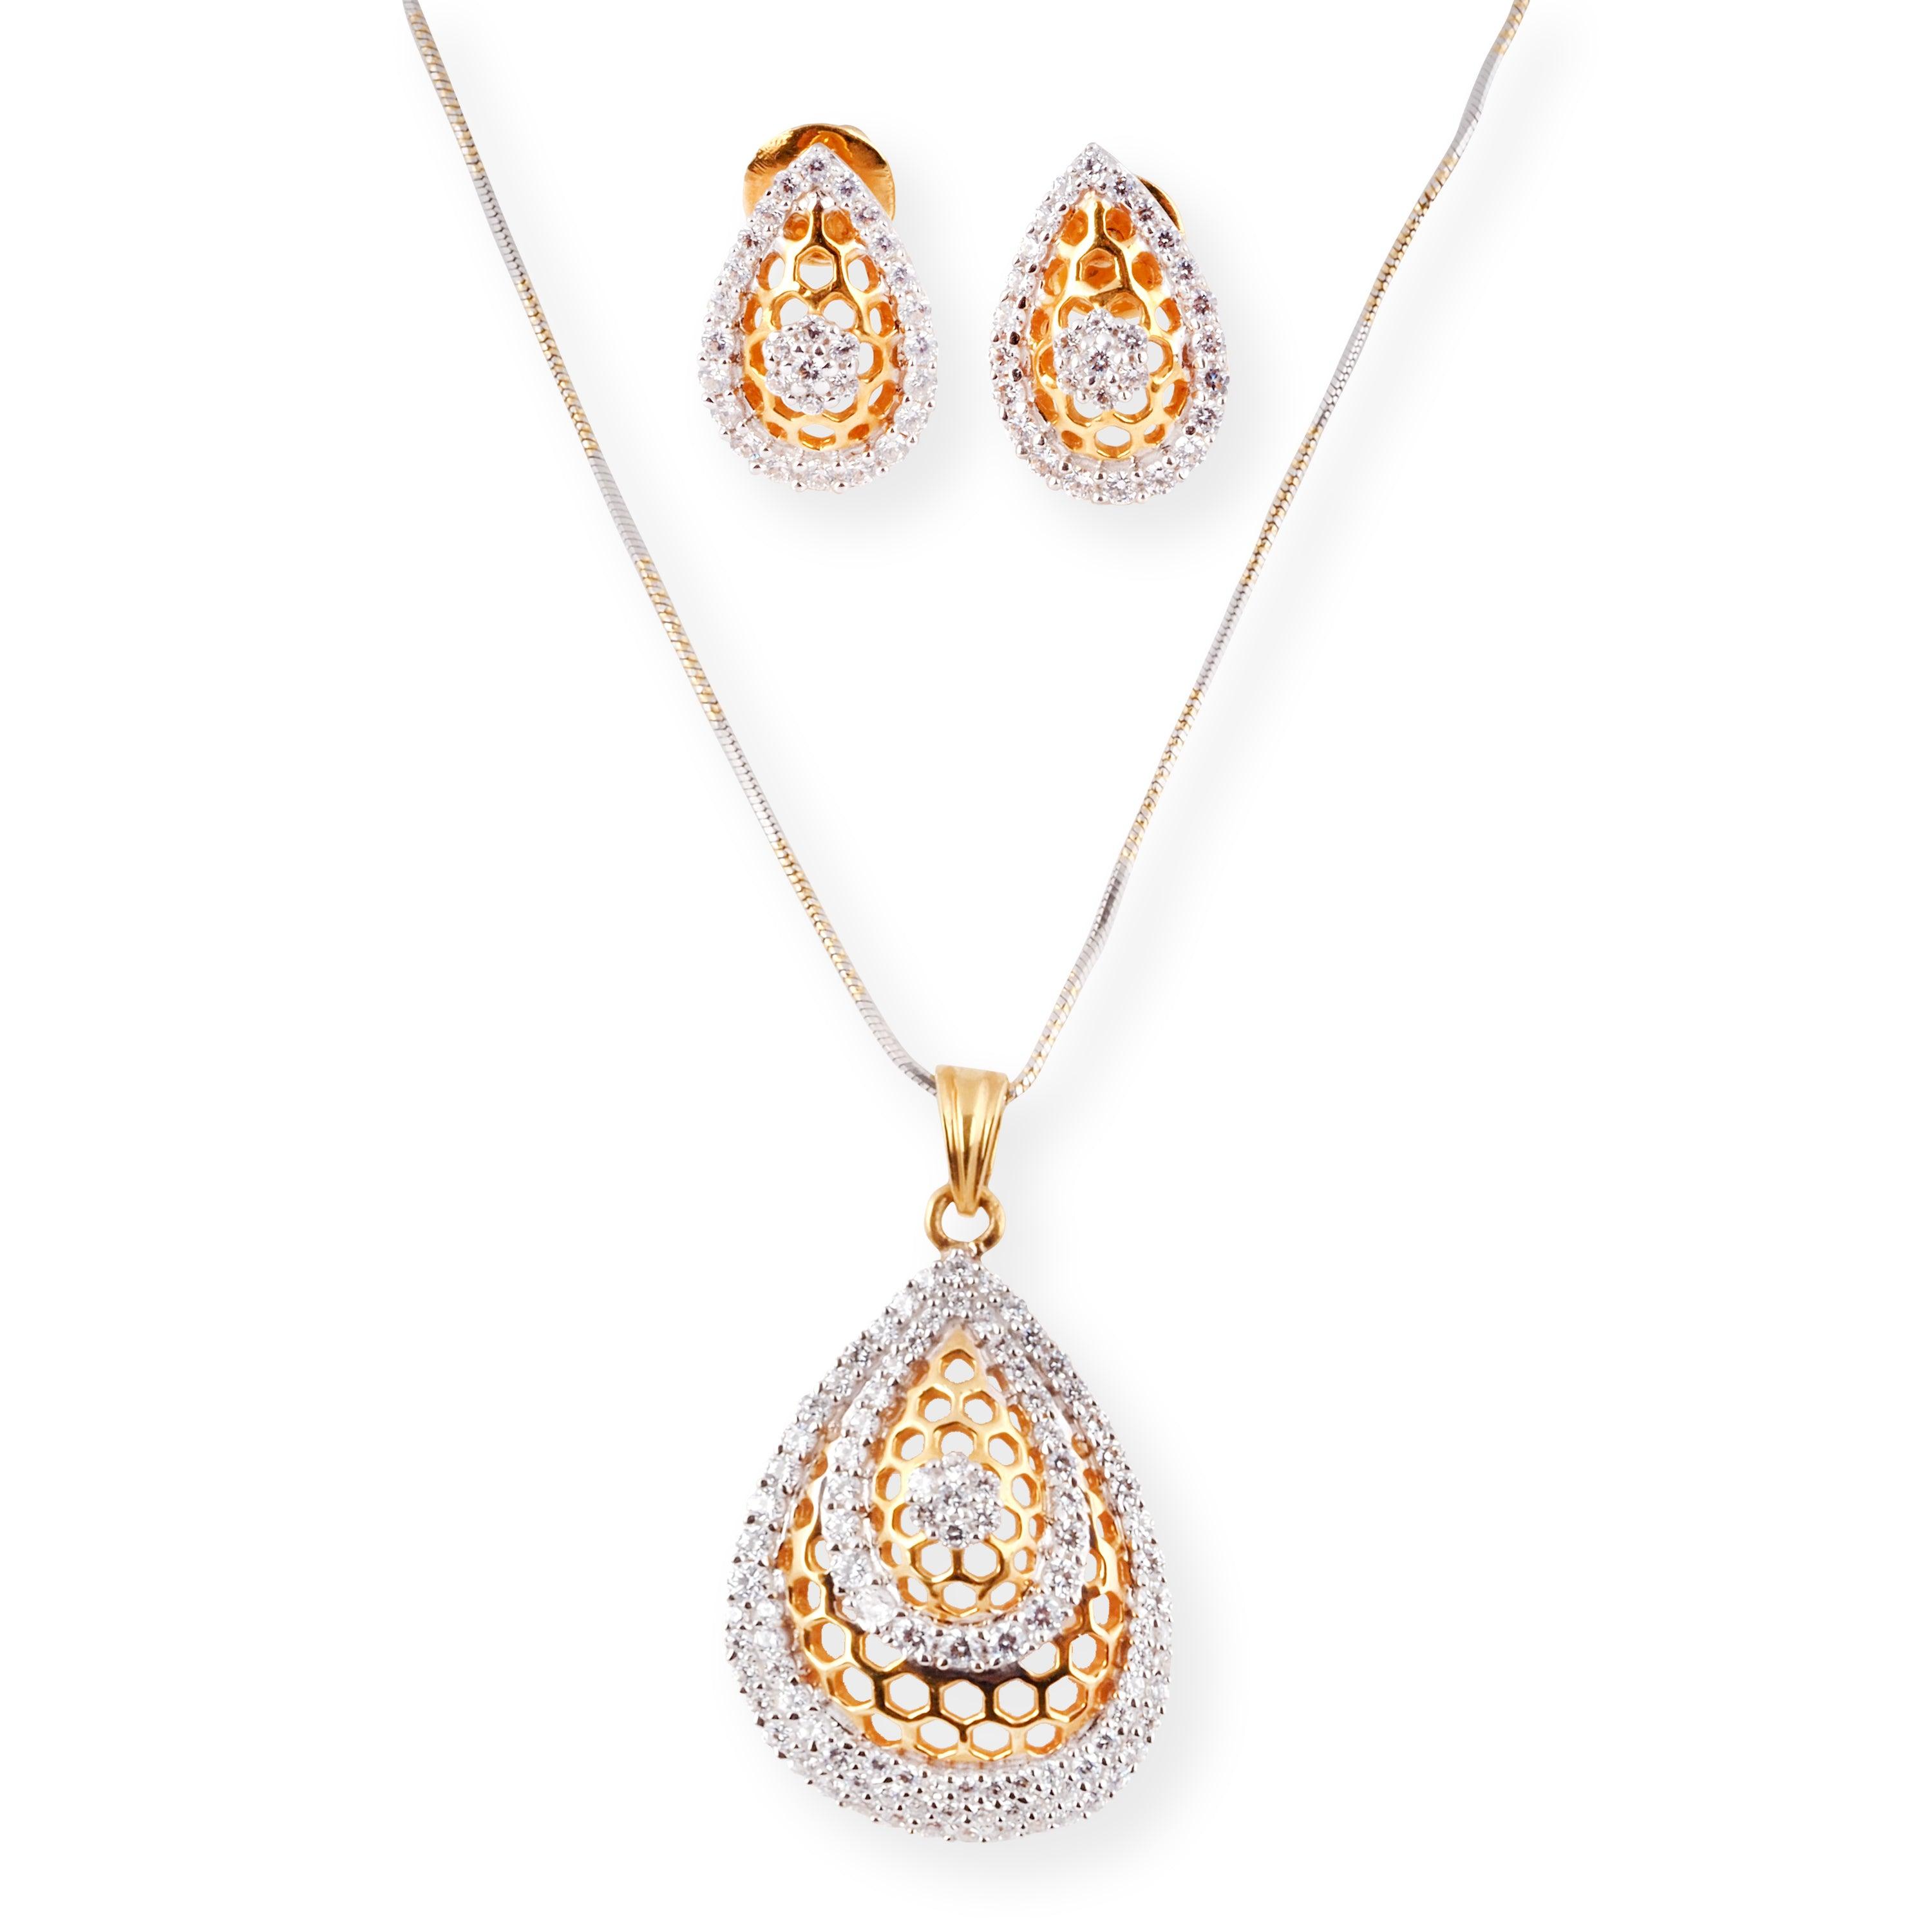 22ct Gold Pendant Set with White Cubic Zirconia Stones (Pendant + Chain + Stud Earrings)-15064 - Minar Jewellers